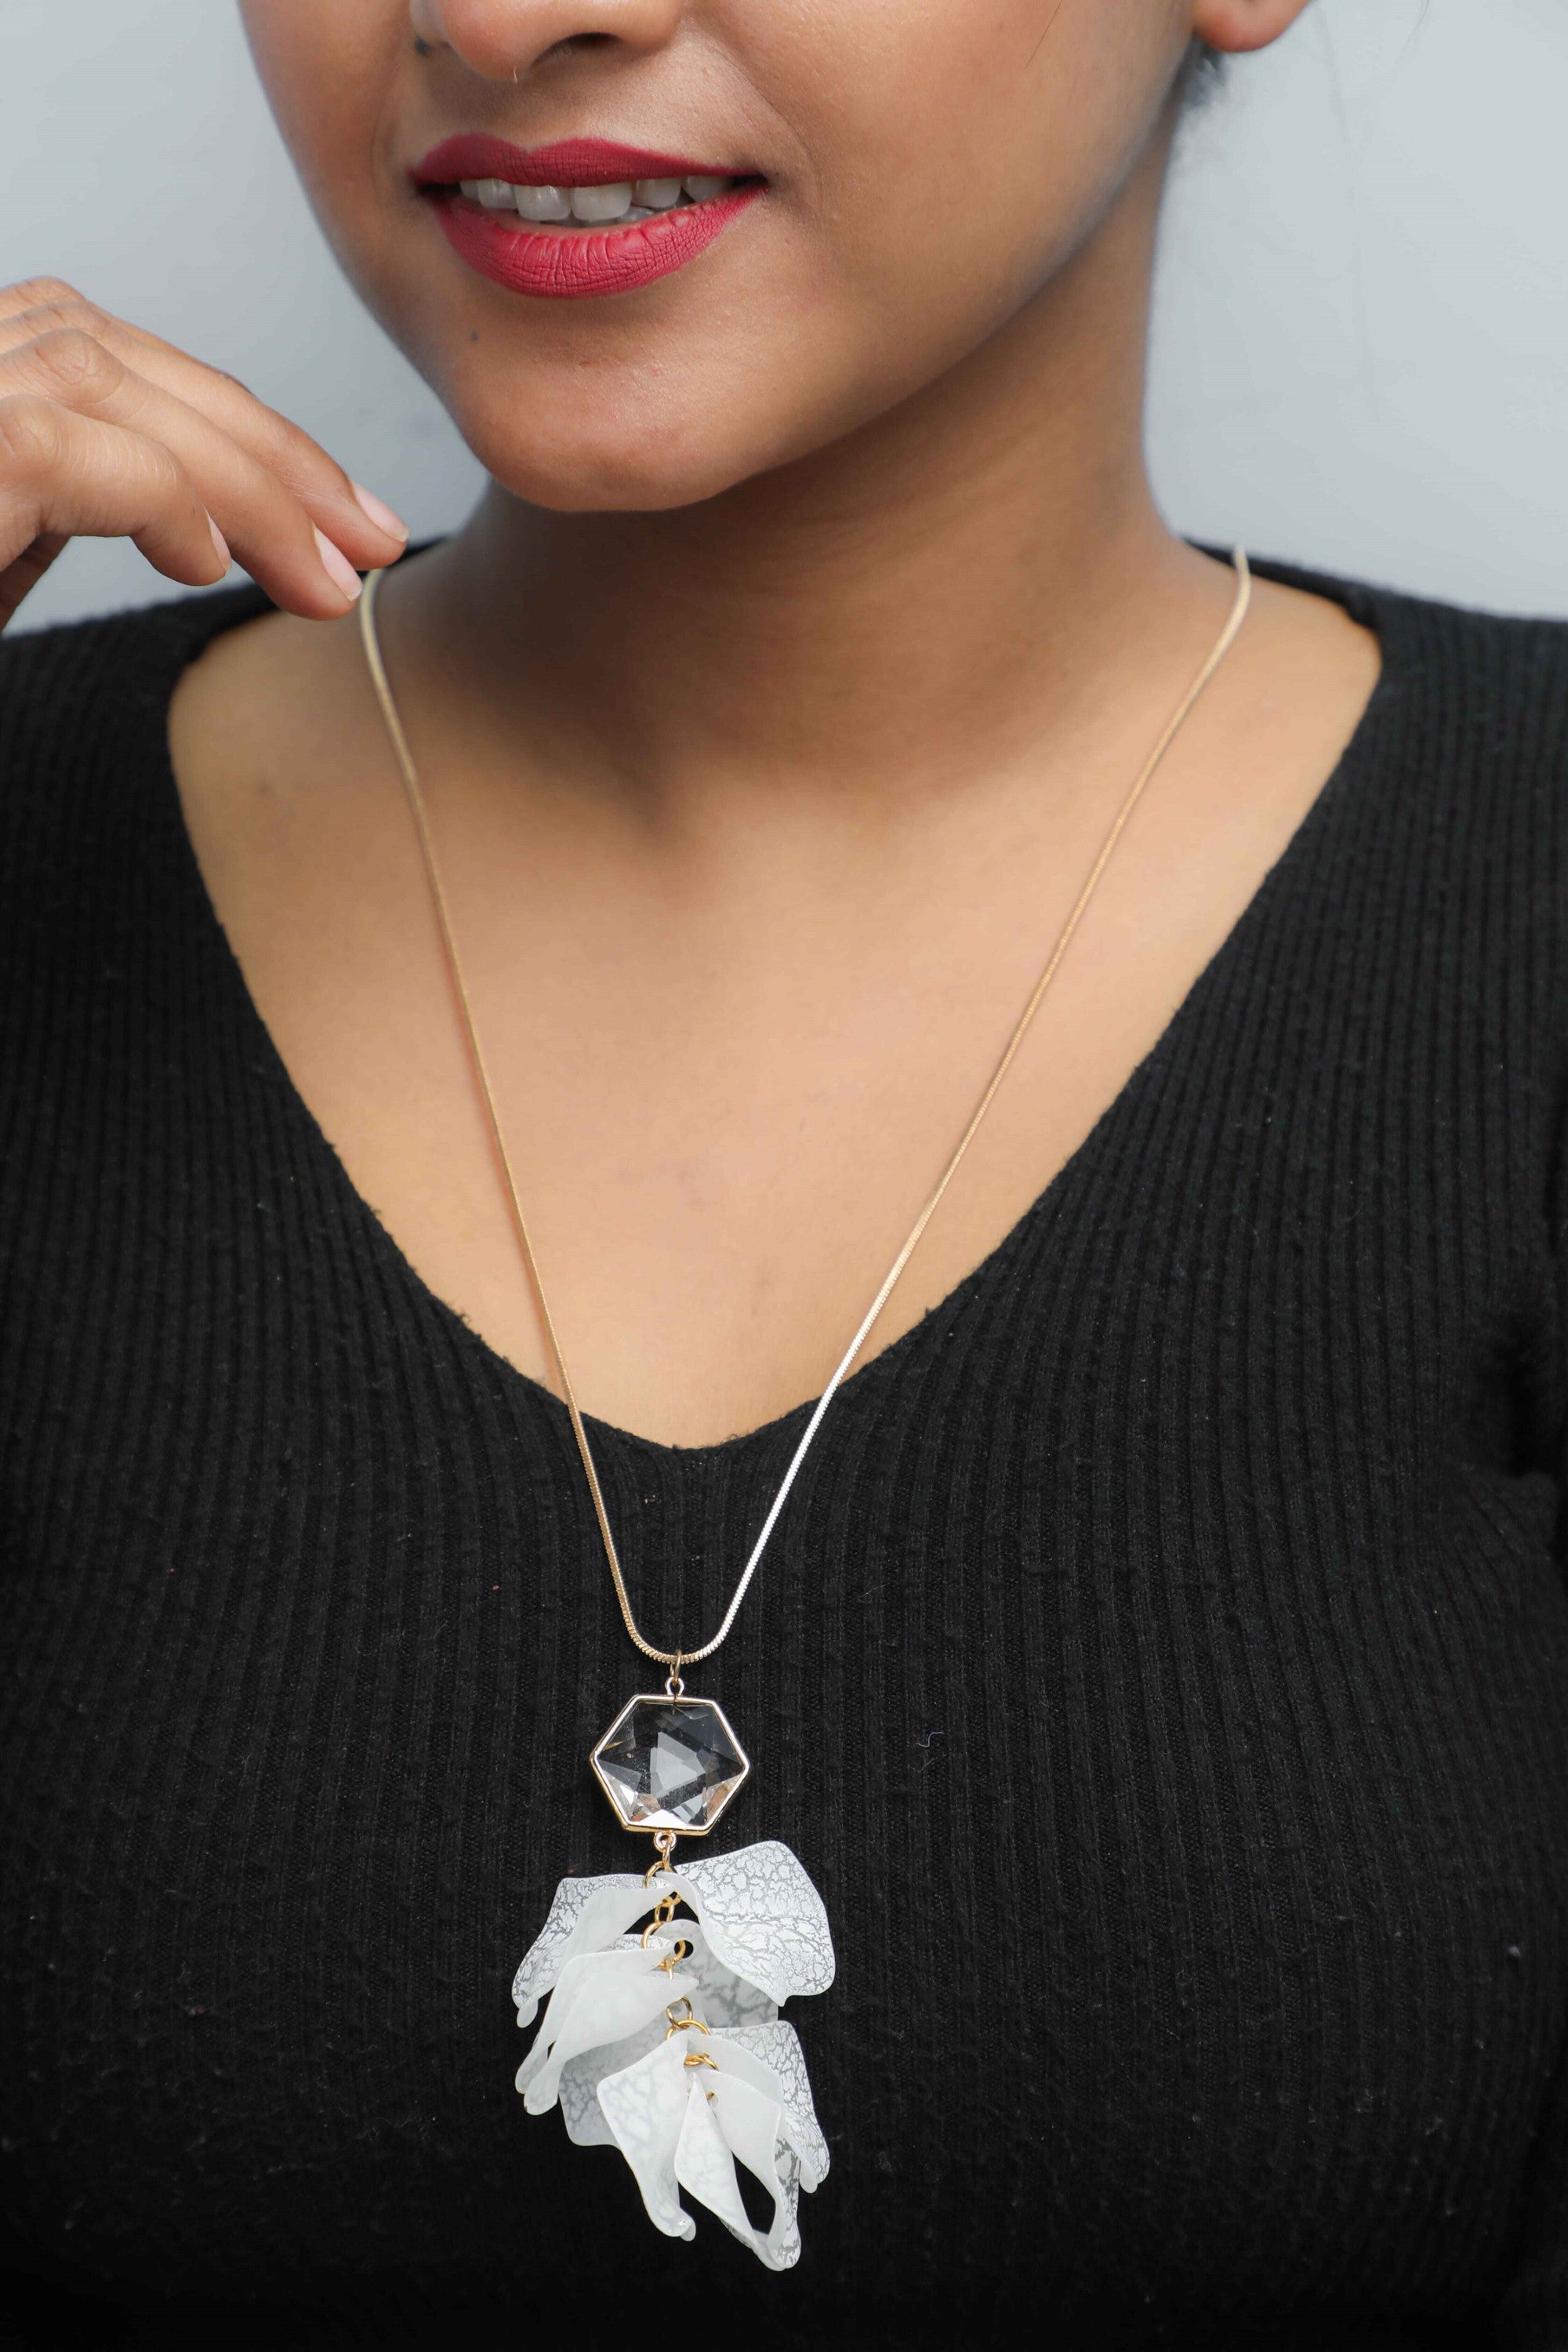 Women's White Feather Styled Necklace  - Voj